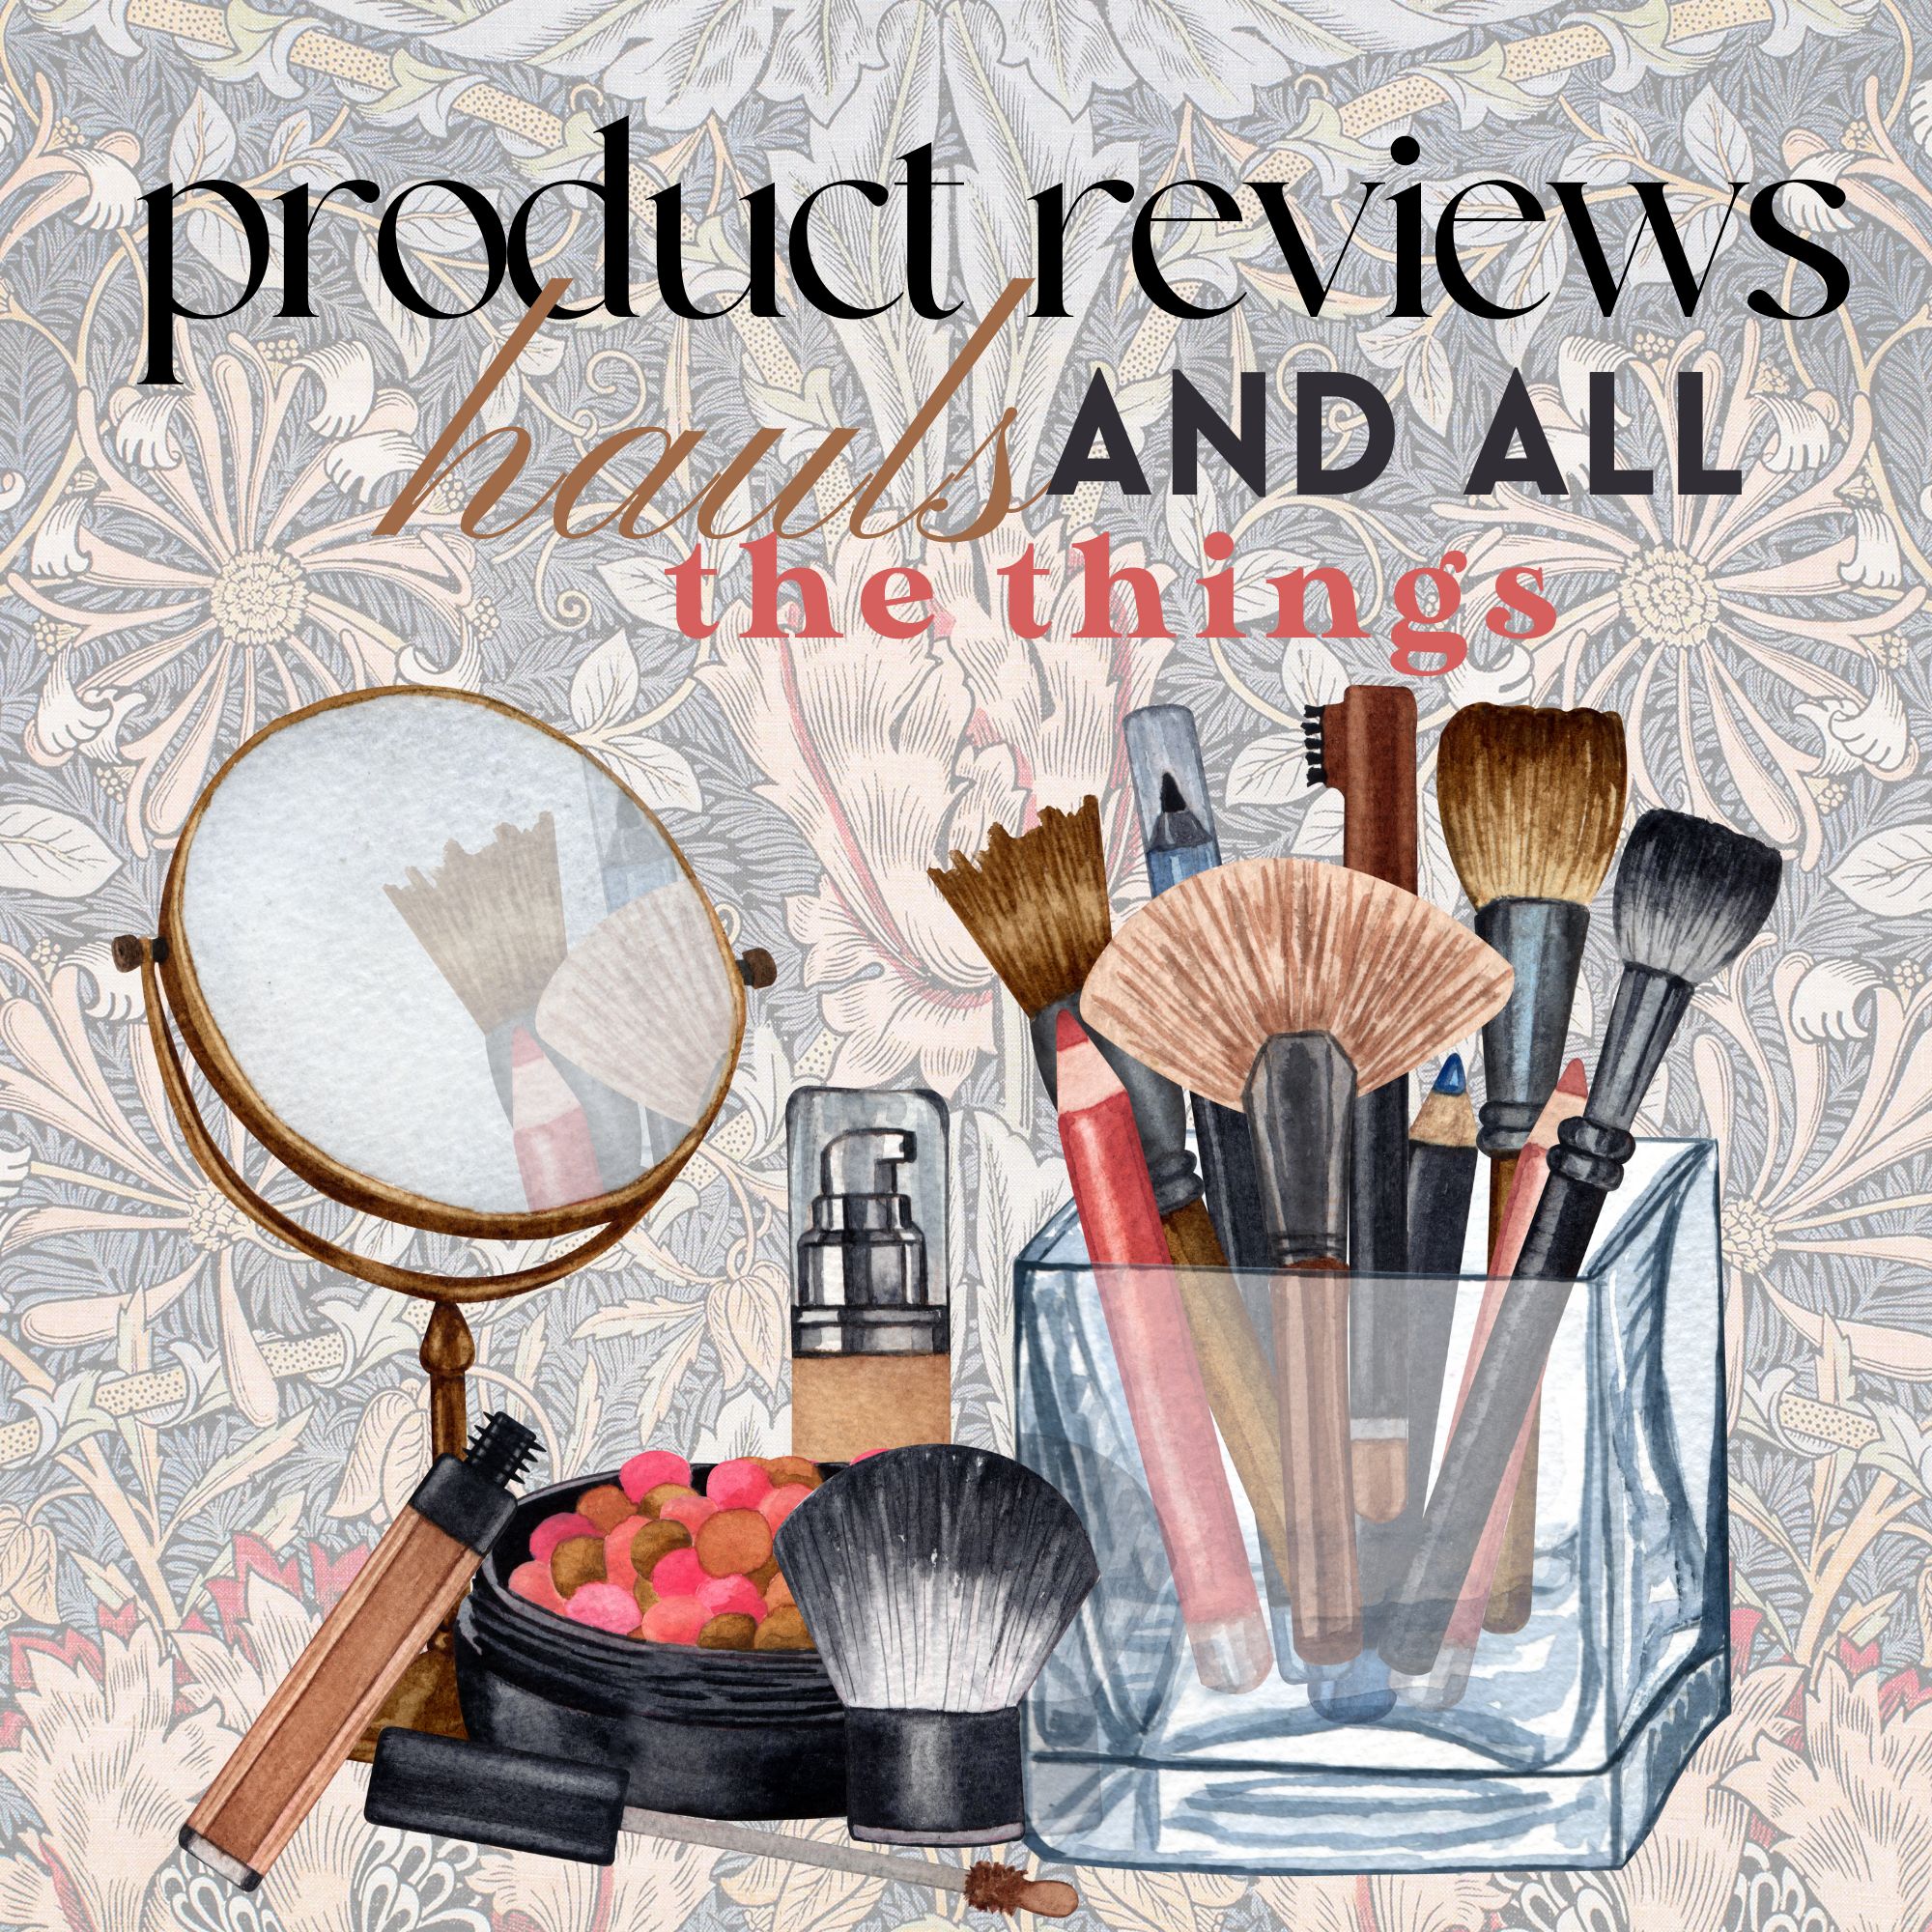 Product Reviews, Hauls and All The Things!